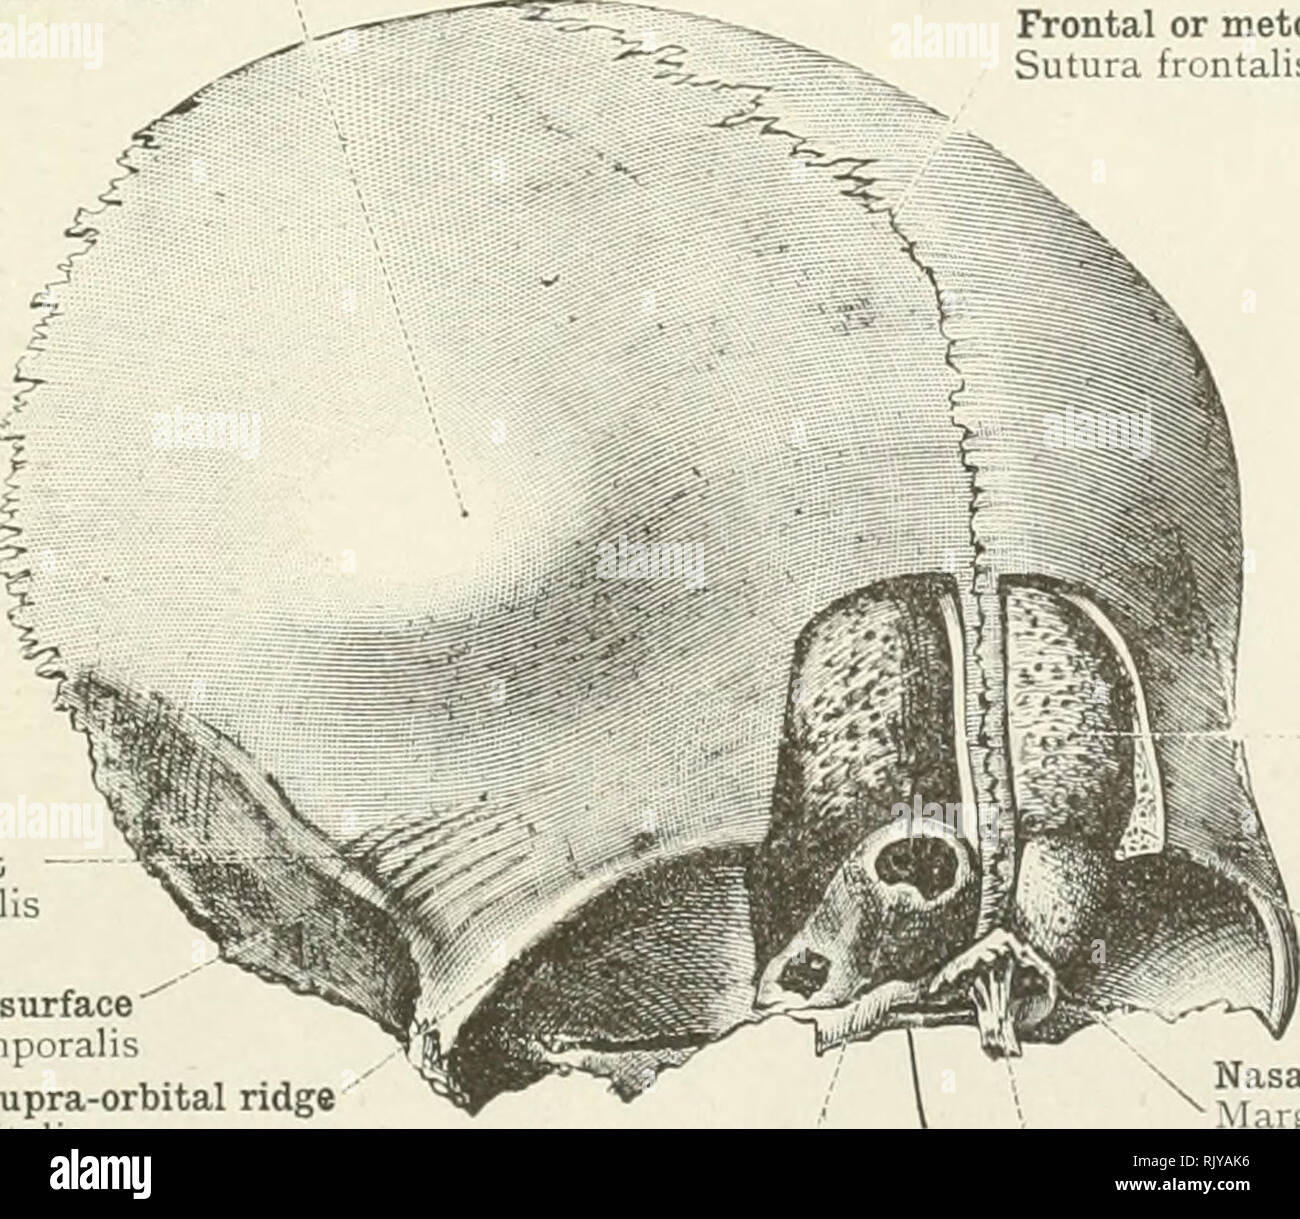 . An atlas of human anatomy for students and physicians. Anatomy. Frontal squama Squama frontalis - Orbital arch, or supra-orbital ridge Margo supra-orbitalis Orbital plate Pars orbitalis Nasal portion Pars nasalis Fig. 155.—The Two Halves of the Frontal Bone from a Hi'man Fcetus in the Eighth Month (Months of Four Weeks Each). Seen from Before. Body-length of foetus 15 inches. Frontal eminence Tuber frontale Temporal crest Linea temporalis Temporal surface' Facies temporalis Orbital arch, or supra-orbital ridge Margo supra-orbitalis. Frontal or metopic suture (var.) Sutura frontalis (var.) In Stock Photo